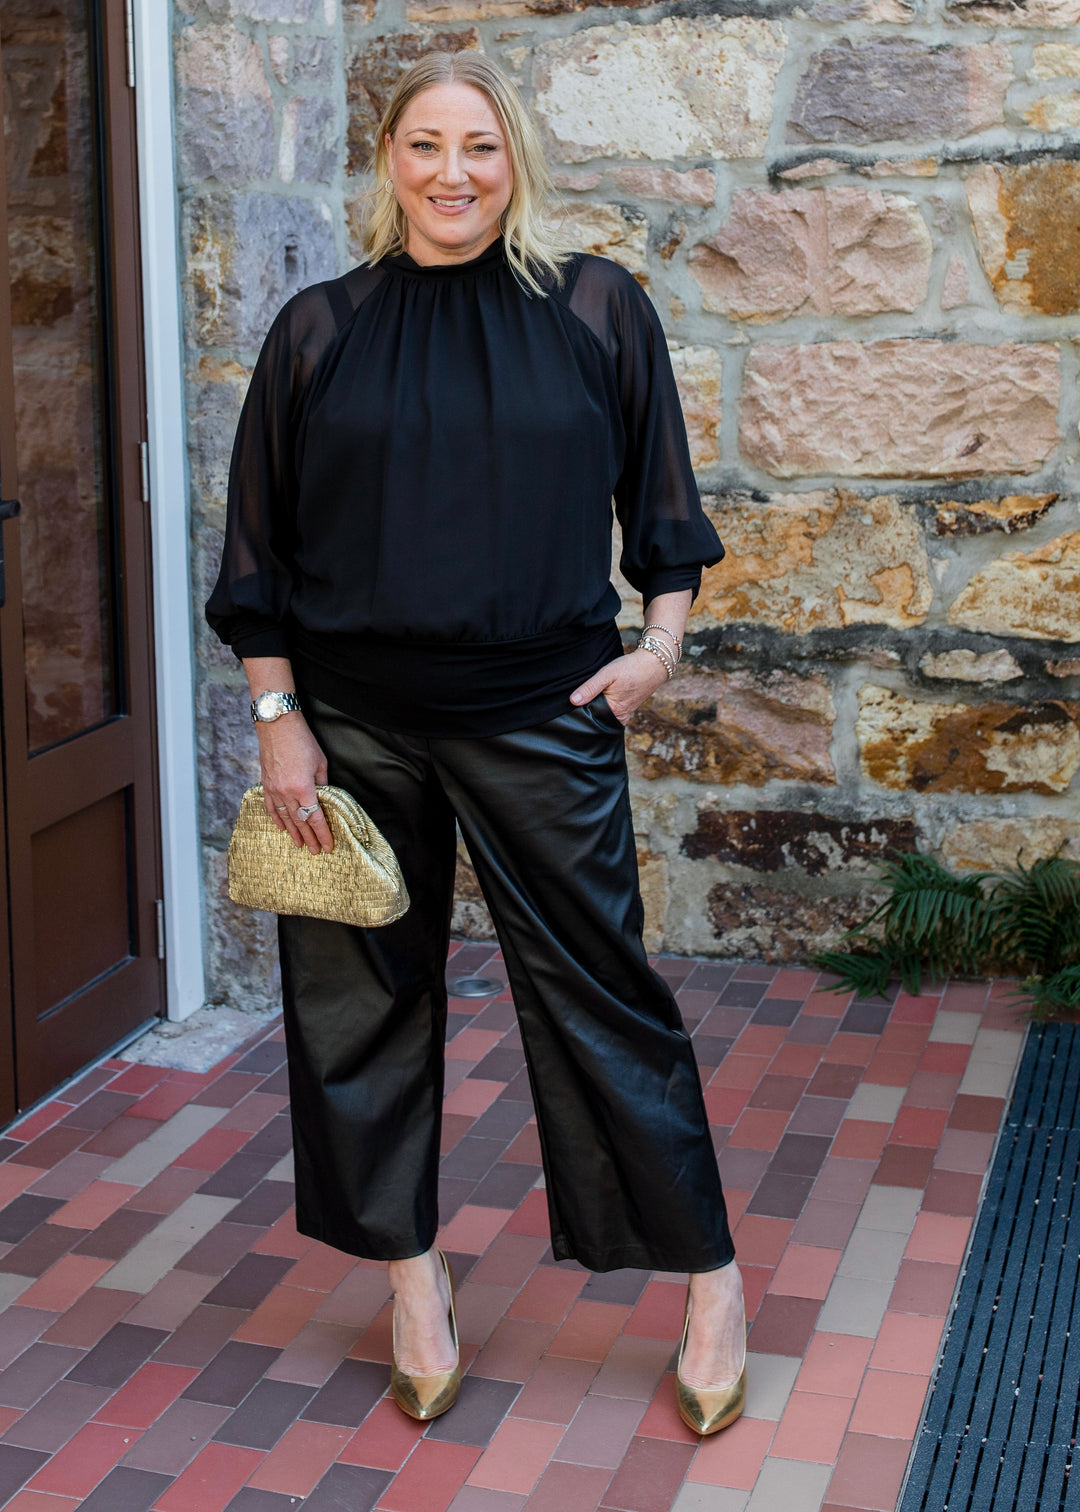 Stride coated Bengaline culotte pant in Black